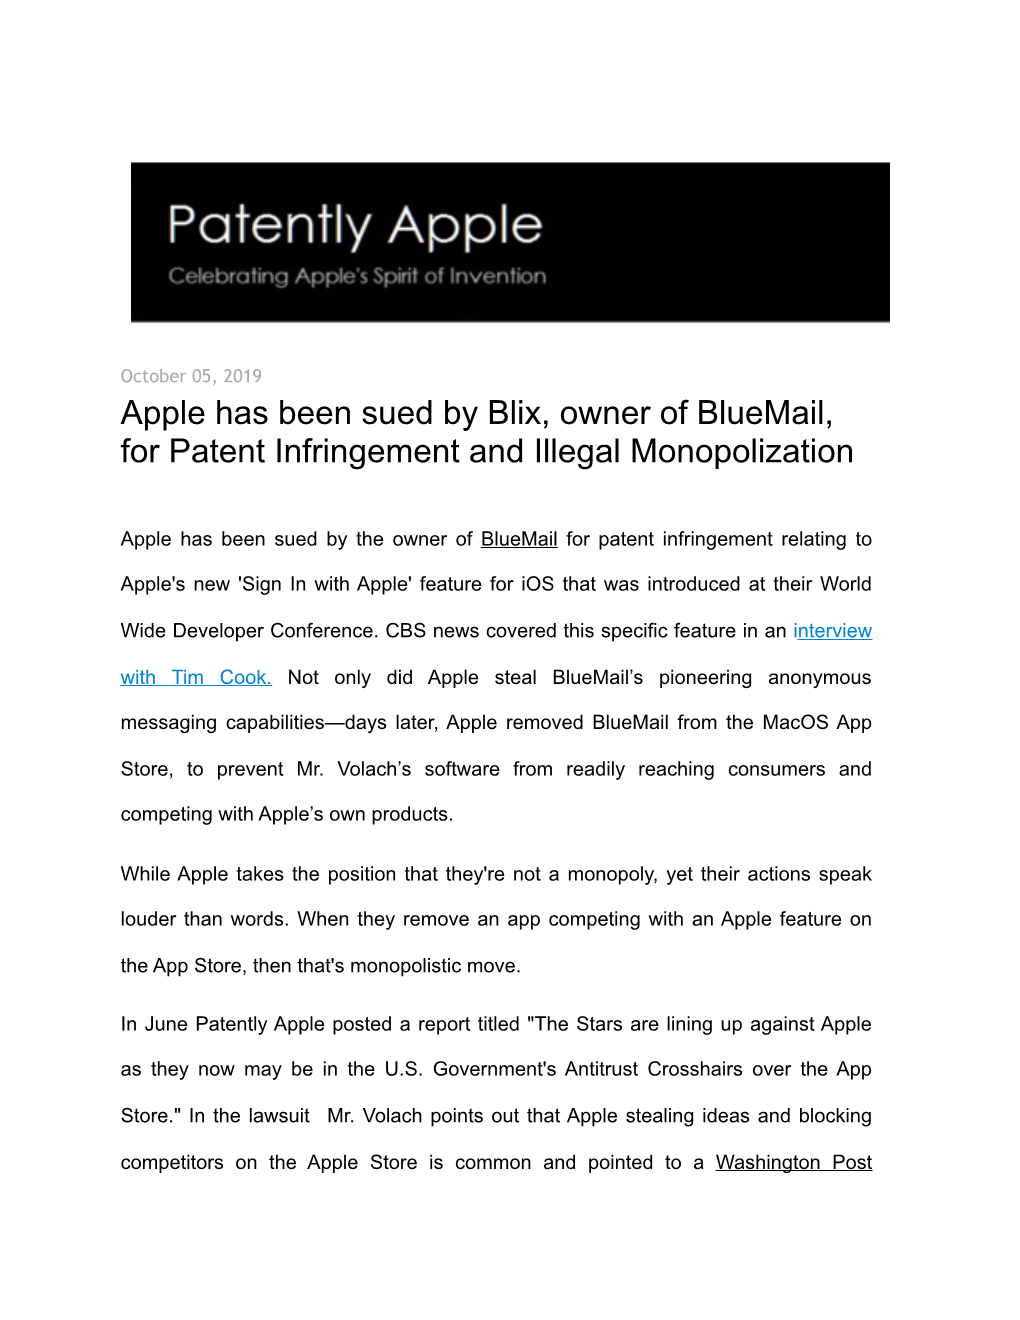 Apple Has Been Sued by Blix, Owner of Bluemail, for Patent Infringement and Illegal Monopolization